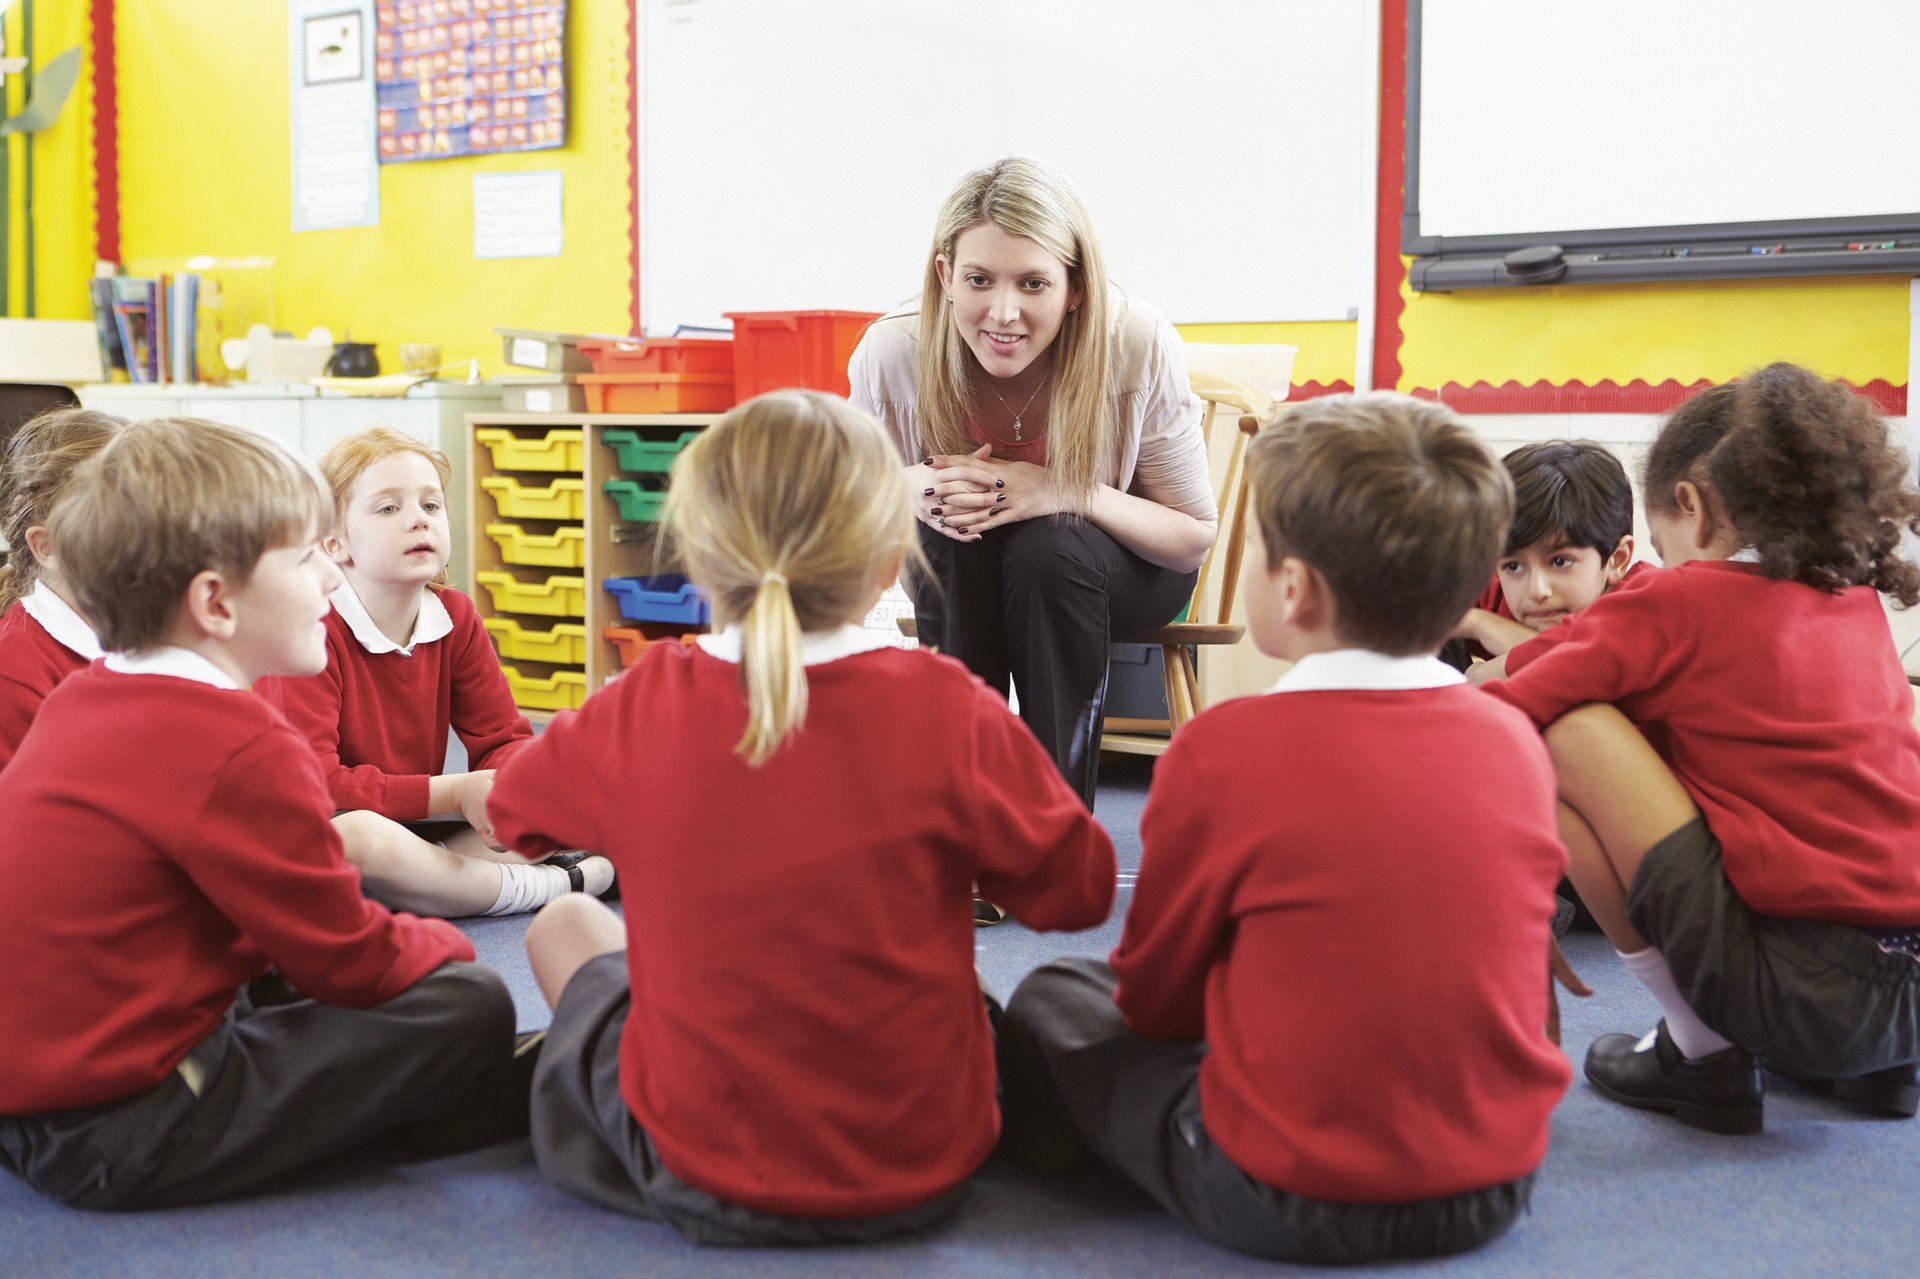 School classroom, female teacher crouching down surrounded by young children in school uniform